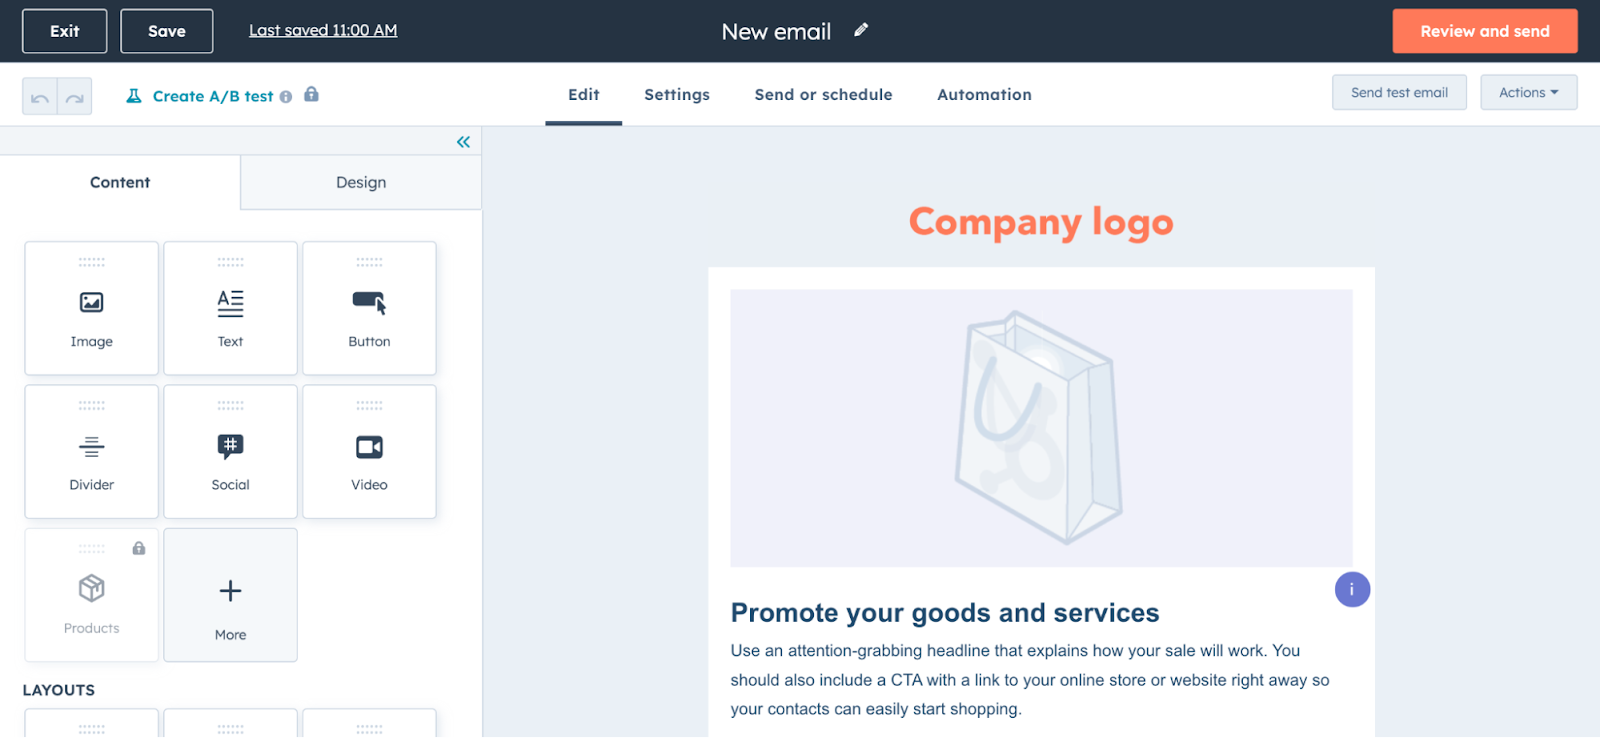 HubSpot's drag-and-drop email builder